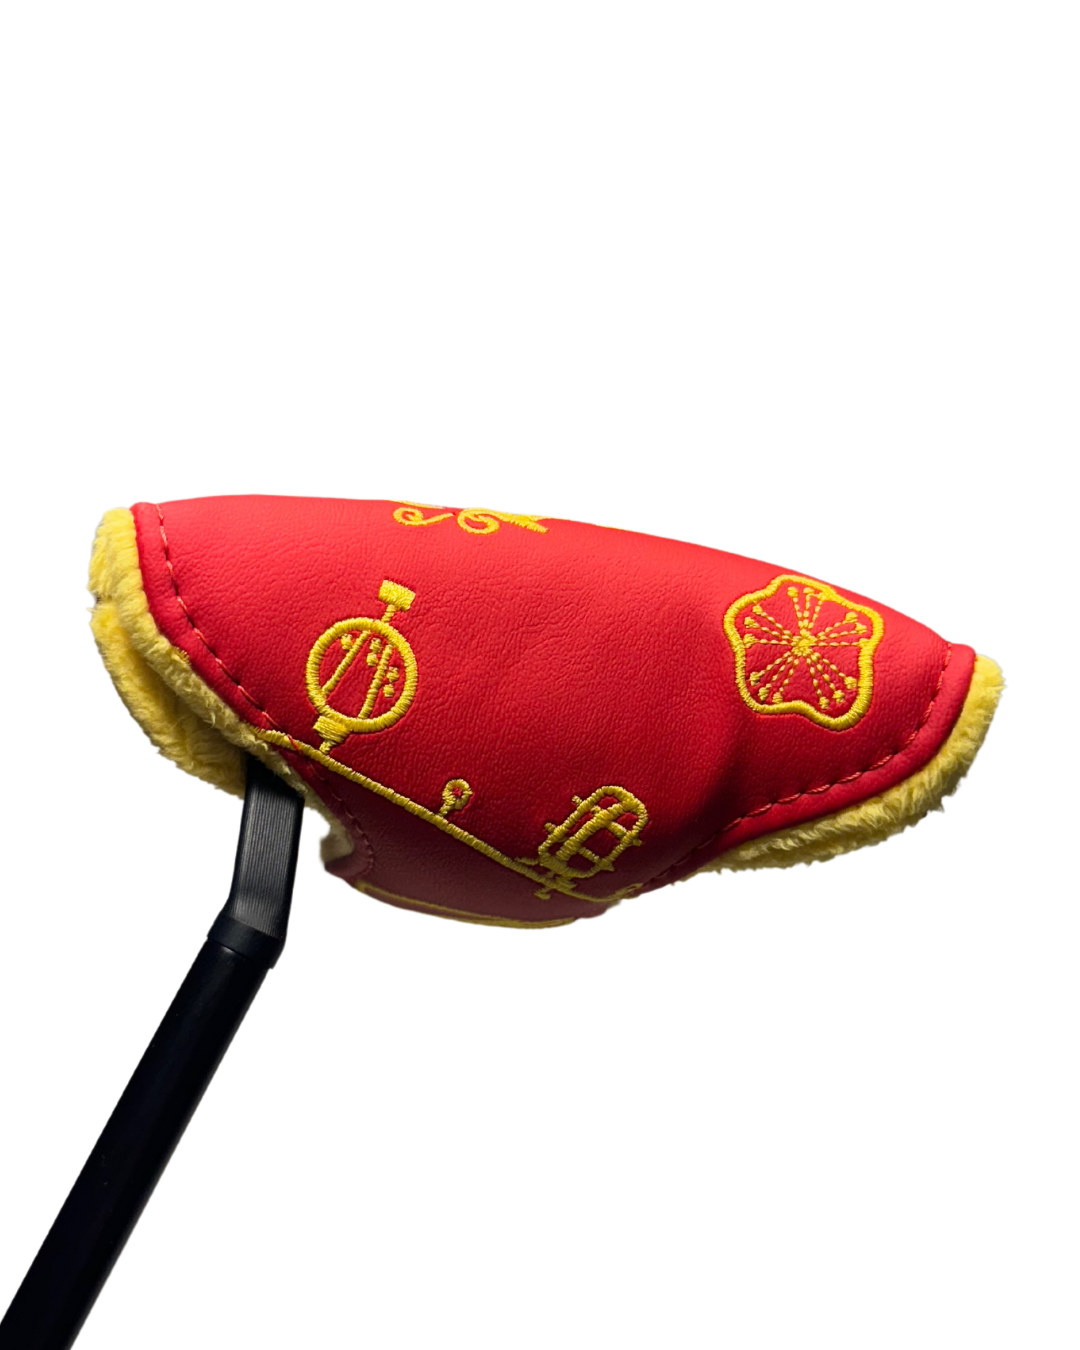 Bored Caddy Mallet CNY Limited